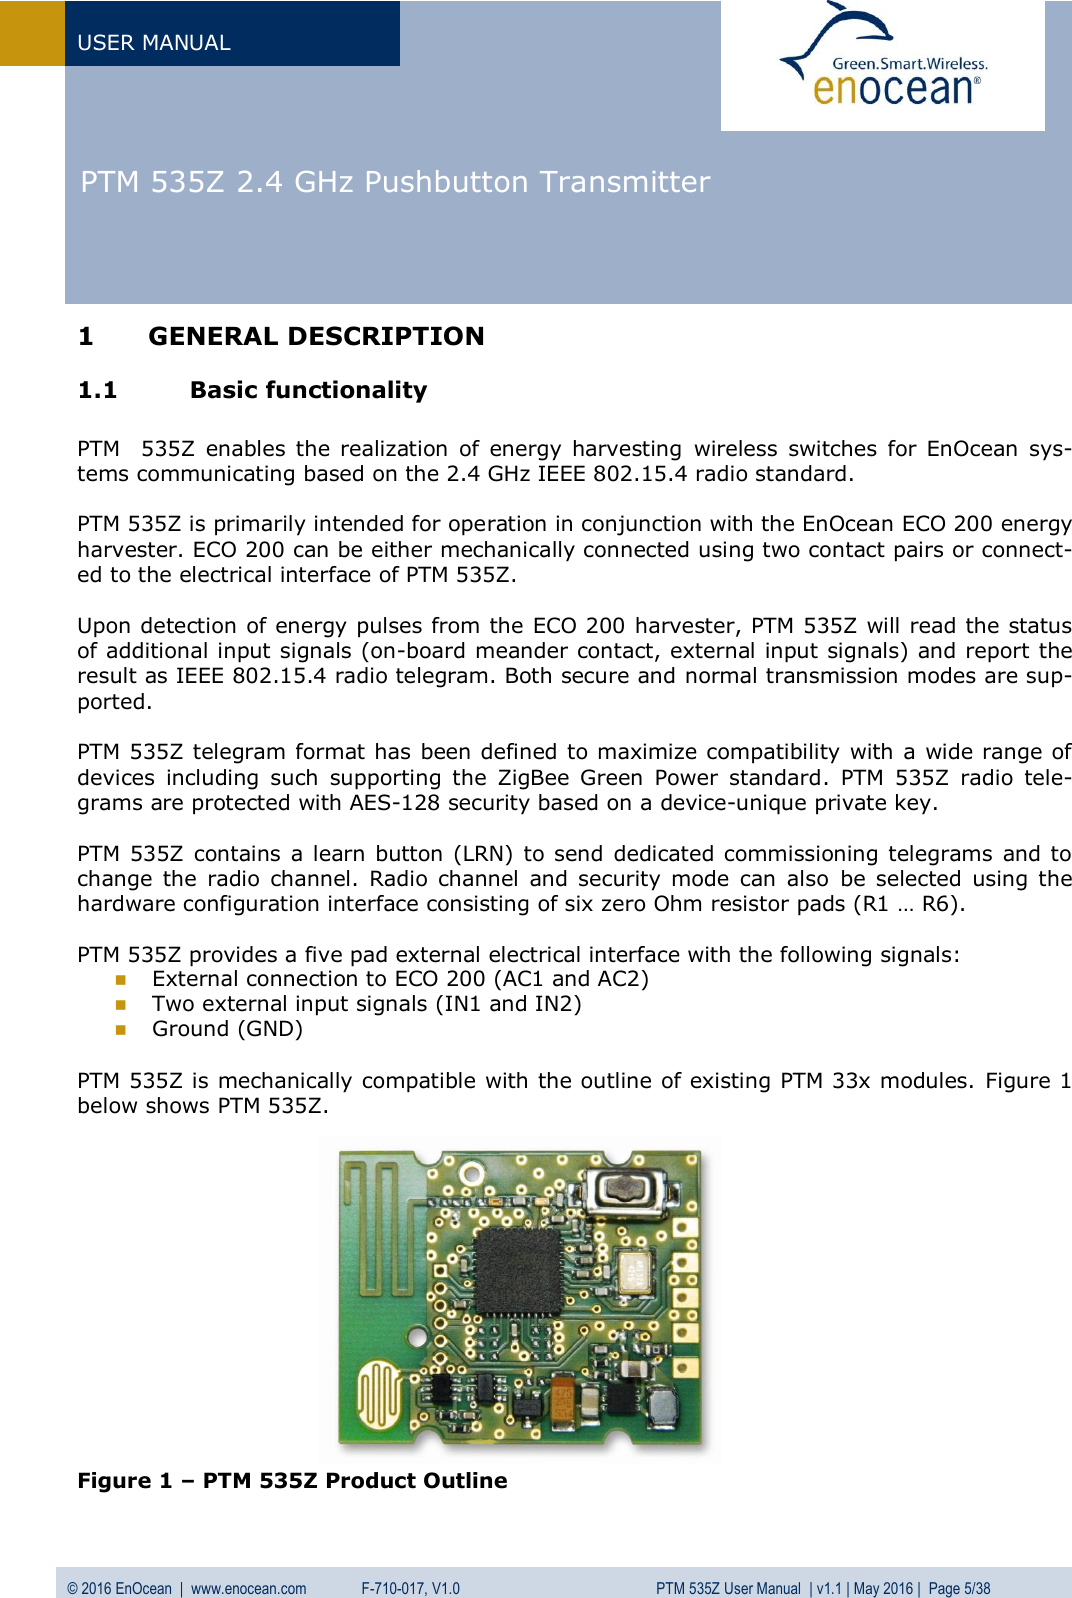   PTM 535Z 2.4 GHz Pushbutton Transmitter  USER MANUAL © 2016 EnOcean  |  www.enocean.com   F-710-017, V1.0          PTM 535Z User Manual  | v1.1 | May 2016 |  Page 5/38   1 GENERAL DESCRIPTION 1.1 Basic functionality  PTM    535Z  enables  the  realization  of  energy harvesting  wireless  switches  for  EnOcean  sys-tems communicating based on the 2.4 GHz IEEE 802.15.4 radio standard.   PTM 535Z is primarily intended for operation in conjunction with the EnOcean ECO 200 energy harvester. ECO 200 can be either mechanically connected using two contact pairs or connect-ed to the electrical interface of PTM 535Z.  Upon detection of energy pulses from the ECO 200 harvester, PTM 535Z will read the status of additional input signals (on-board meander contact, external input signals) and report the result as IEEE 802.15.4 radio telegram. Both secure and normal transmission modes are sup-ported.  PTM 535Z telegram format has been defined to maximize compatibility with a wide range of devices  including  such  supporting  the  ZigBee  Green  Power  standard.  PTM  535Z  radio  tele-grams are protected with AES-128 security based on a device-unique private key.  PTM 535Z contains  a learn button (LRN)  to send dedicated  commissioning telegrams and to change  the  radio channel.  Radio  channel  and security mode can  also  be selected using the hardware configuration interface consisting of six zero Ohm resistor pads (R1 … R6).  PTM 535Z provides a five pad external electrical interface with the following signals:  External connection to ECO 200 (AC1 and AC2)  Two external input signals (IN1 and IN2)  Ground (GND)  PTM 535Z is mechanically compatible with the outline of existing PTM 33x modules. Figure 1 below shows PTM 535Z.               Figure 1 – PTM 535Z Product Outline